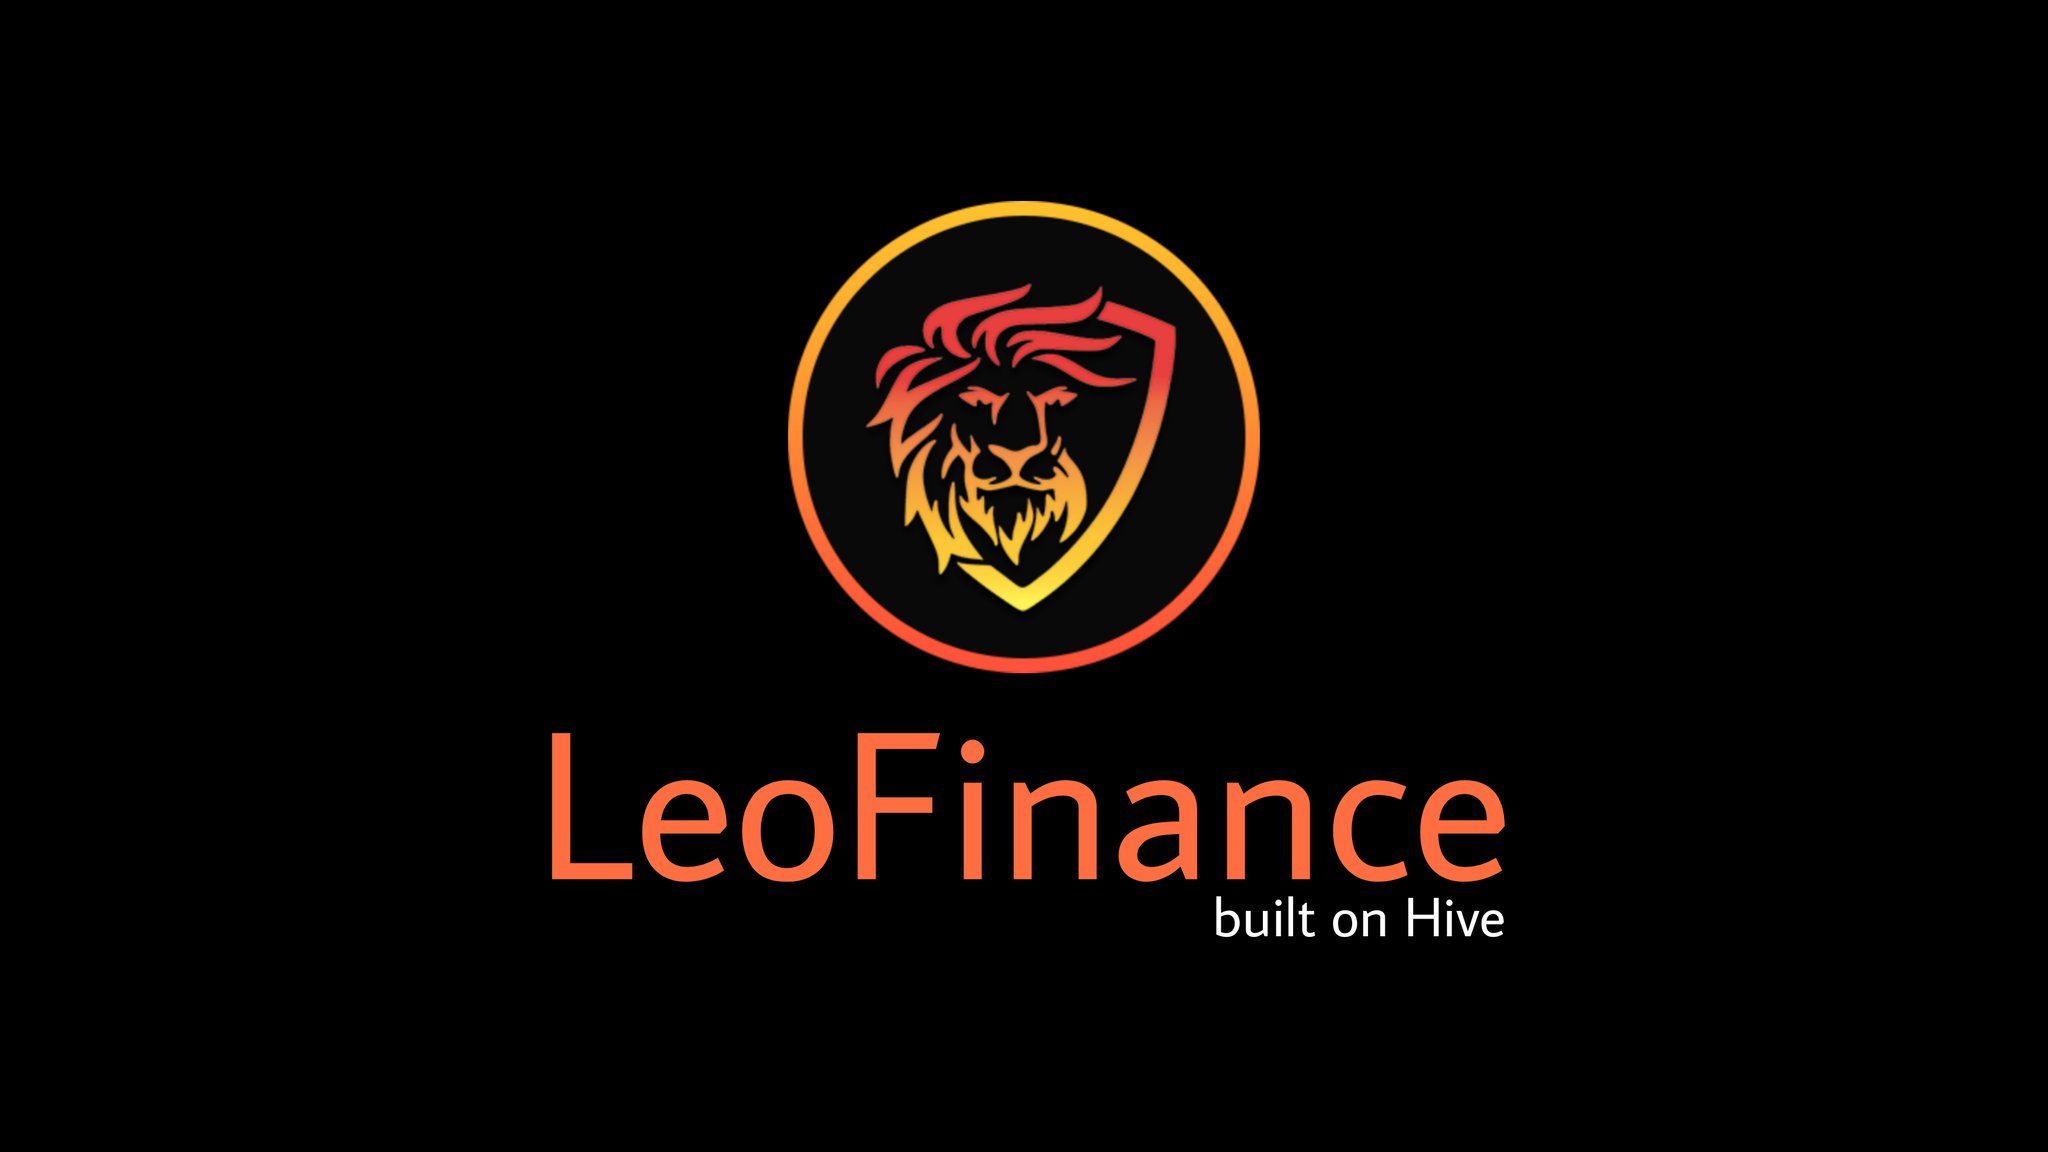 The LeoFinance logo - Our crypto community powered by Hive.